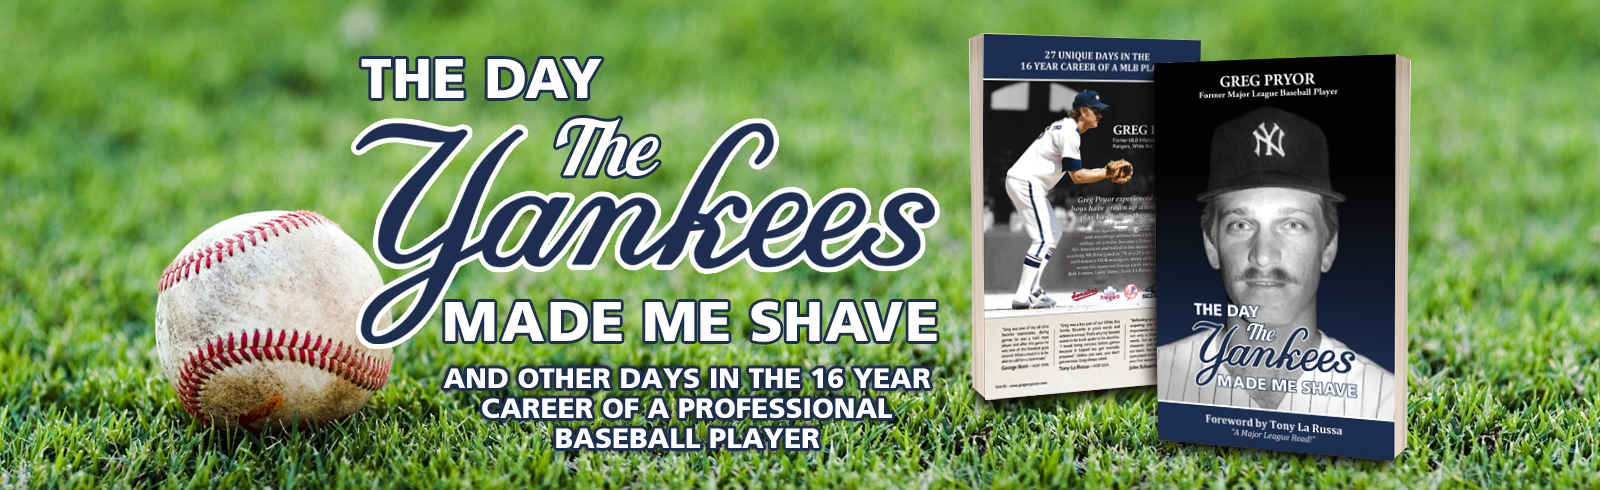 The Day The Yankees Made Me Shave Book by Greg Pryor